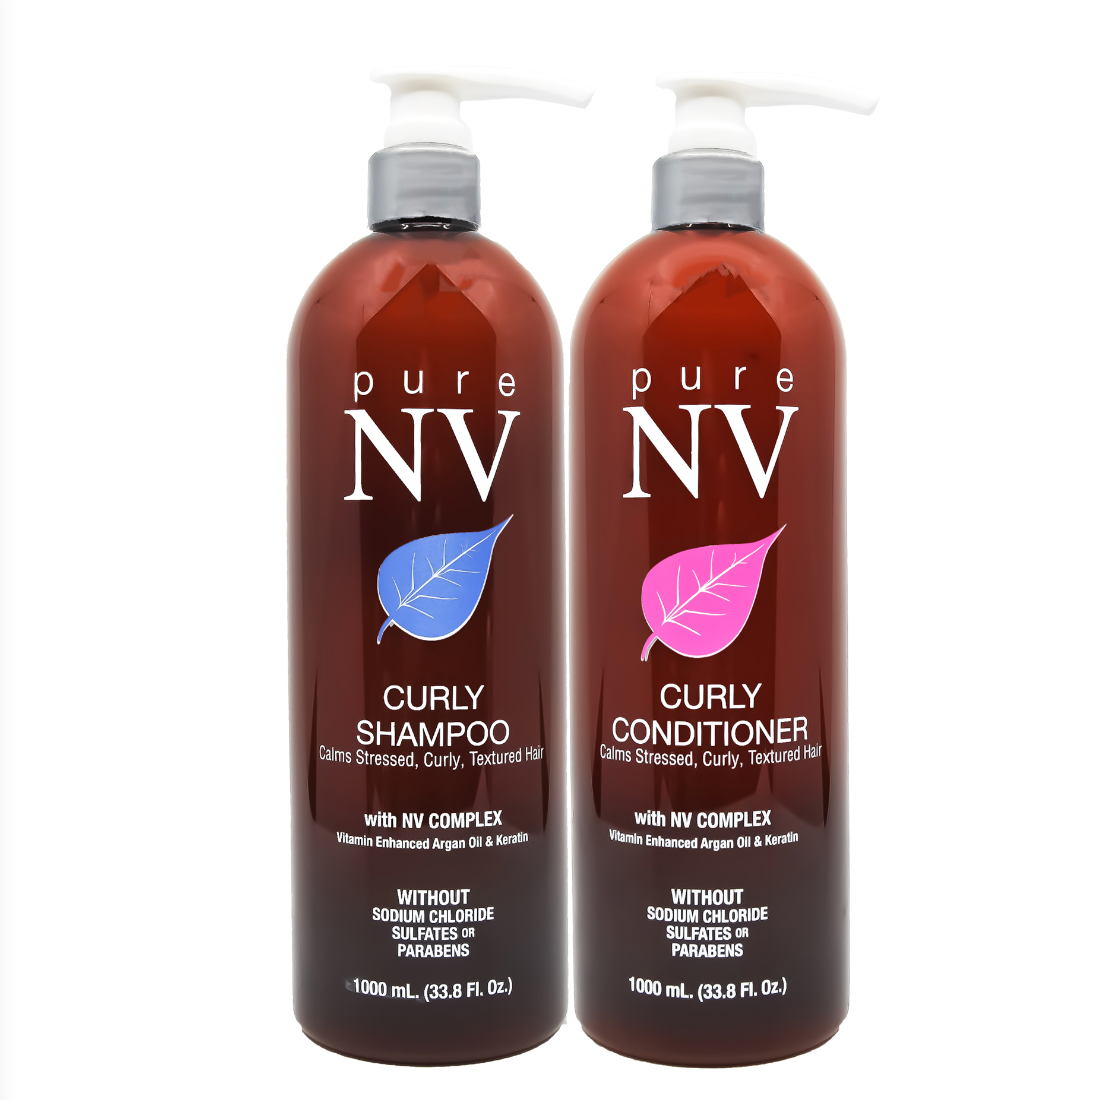 CURL DUO FAMILY VALUE